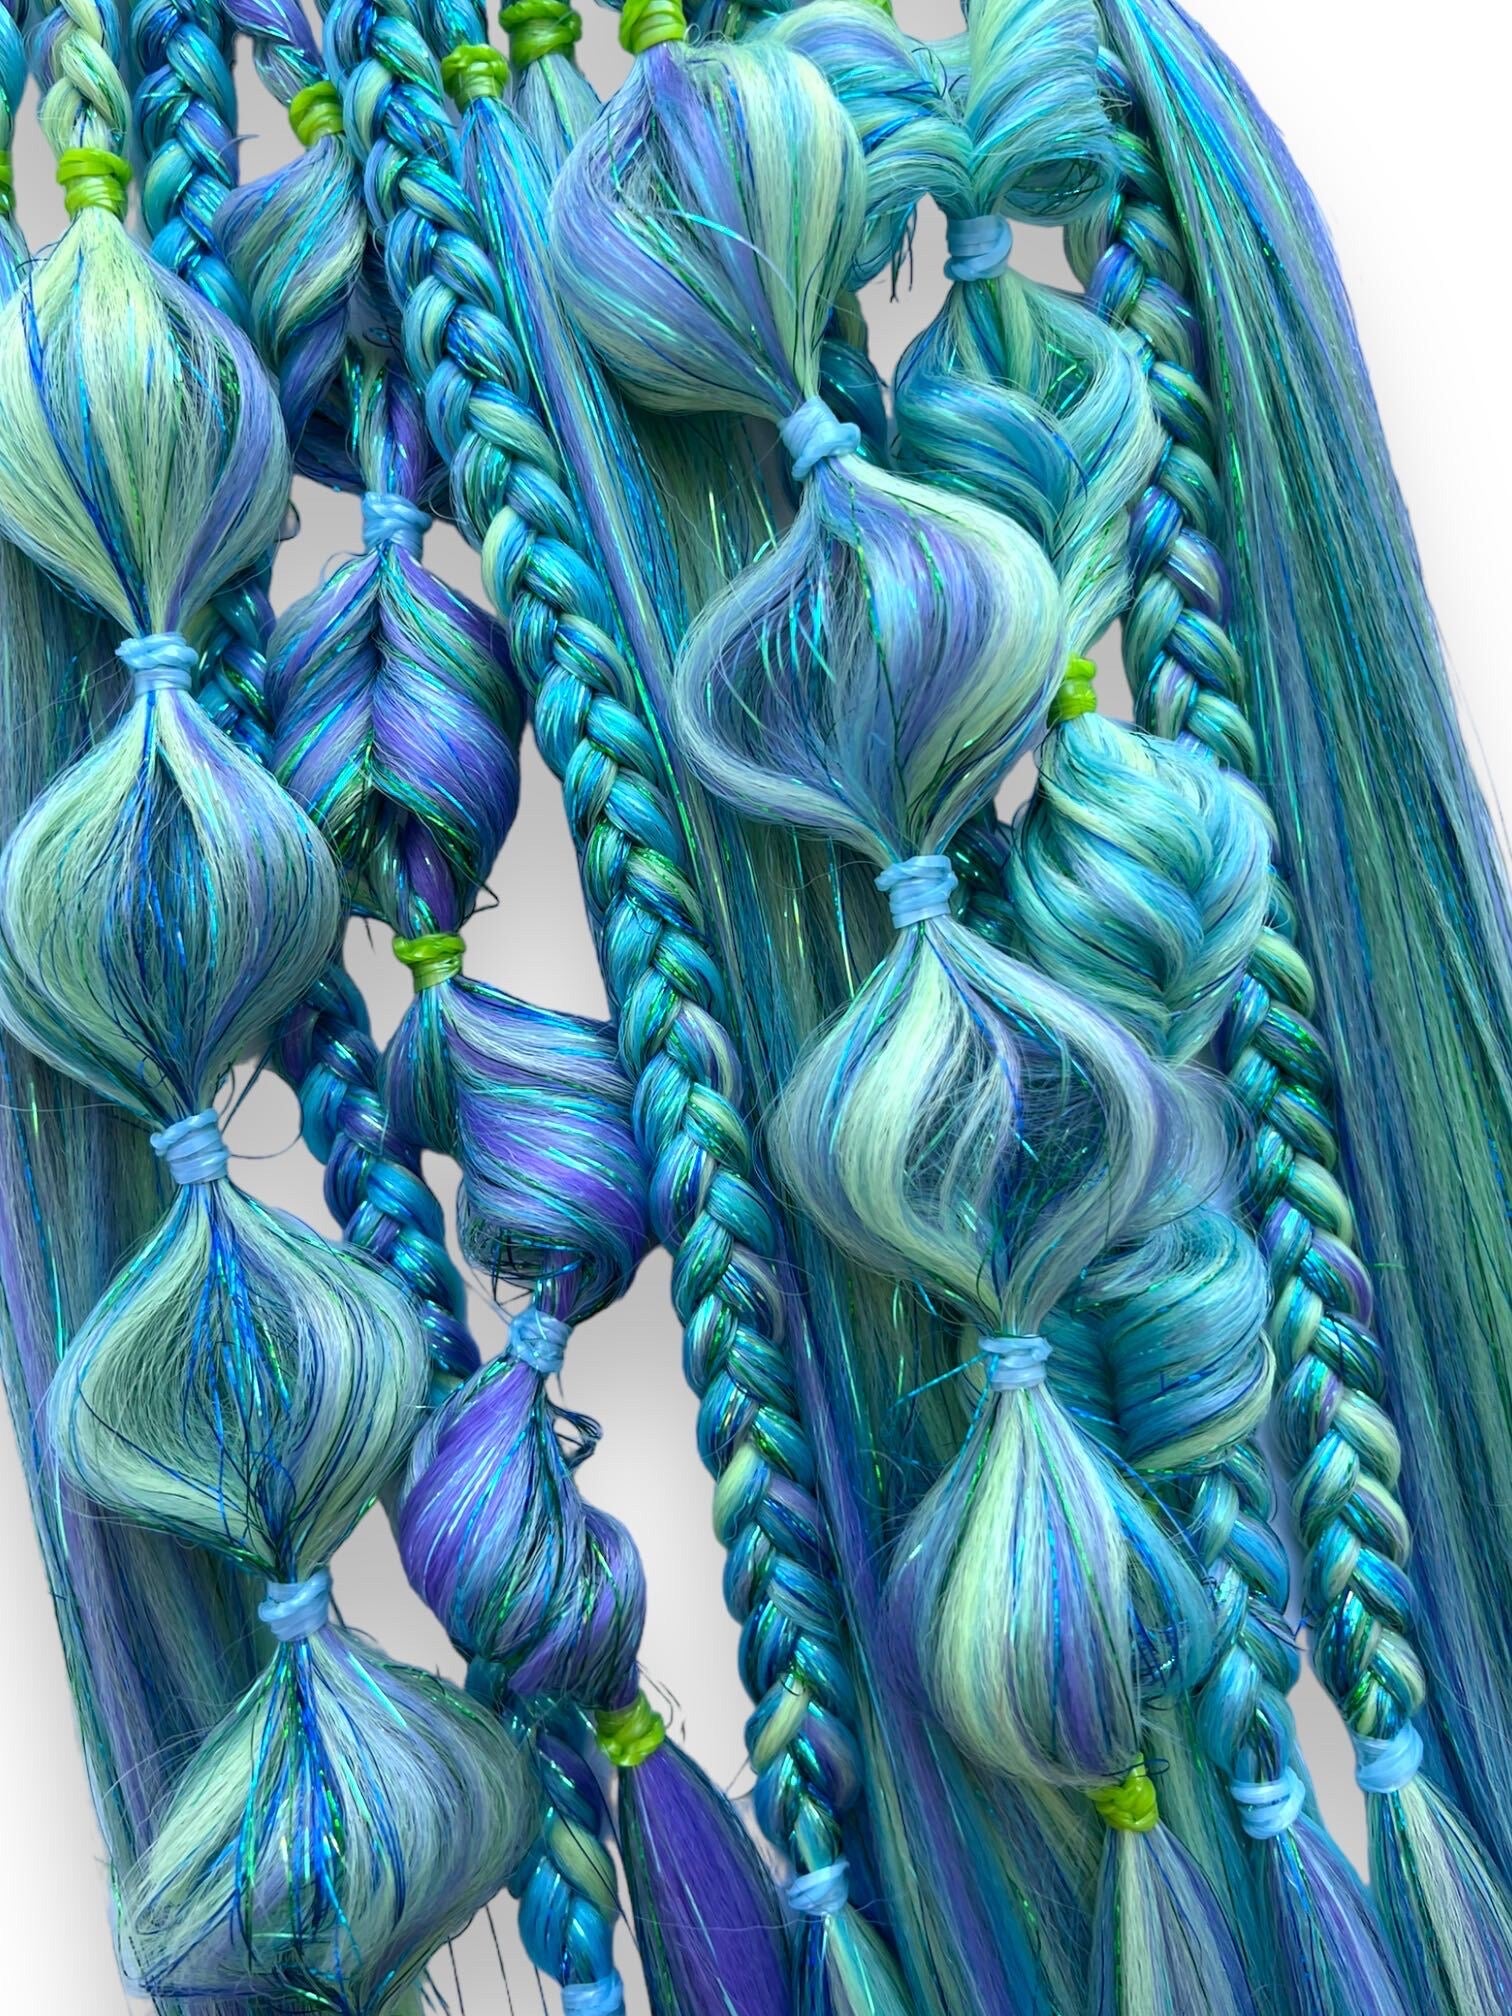 Circuit Grounds - Tie-In Festival Braid Extension Set